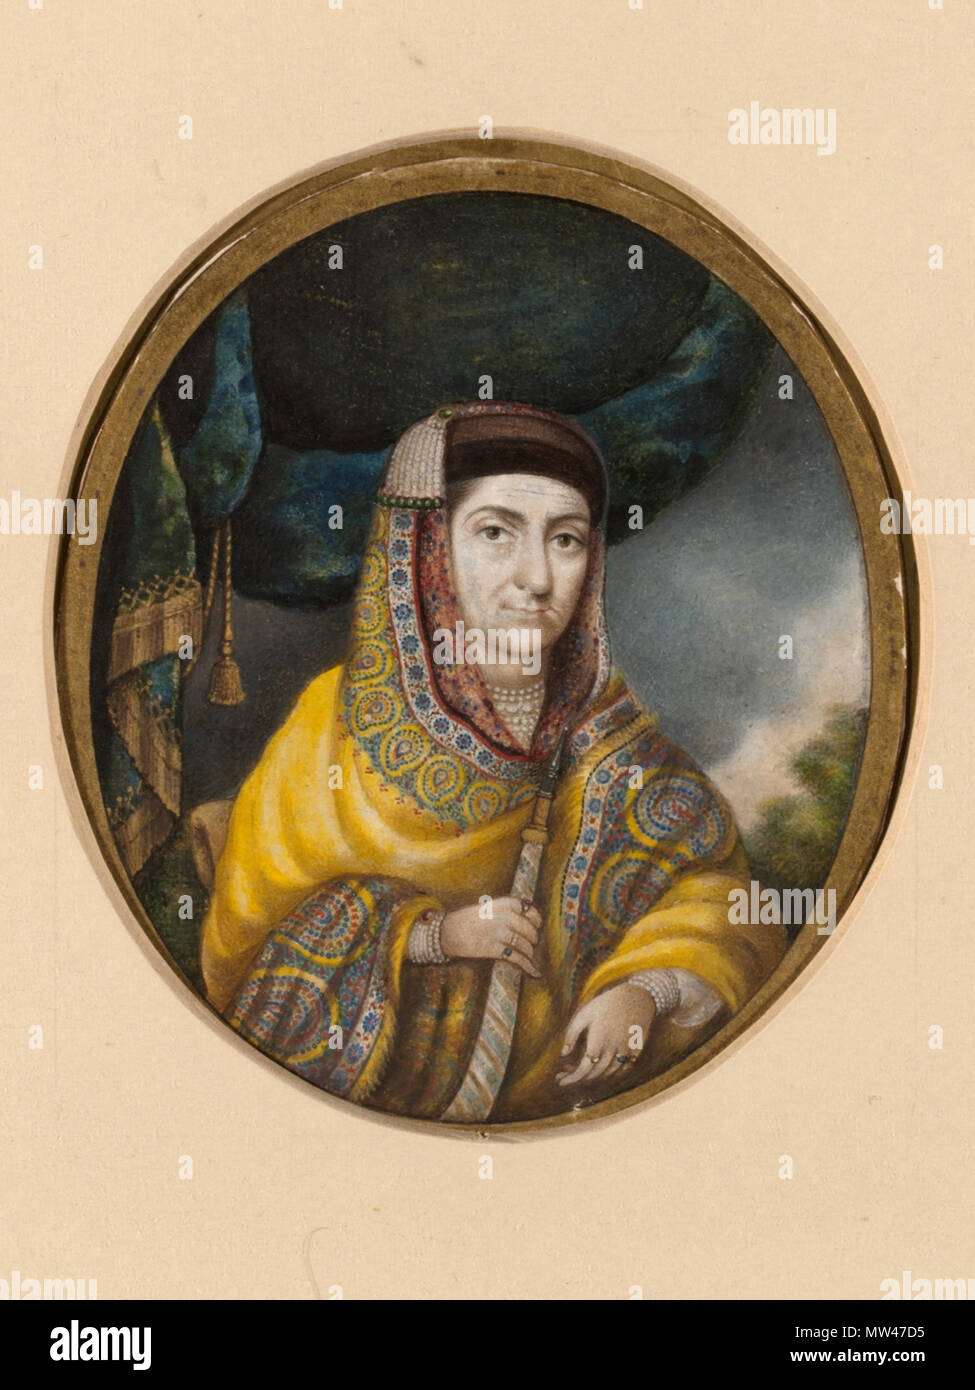 . English: This Company painting is by Jiwan Das of Delhi and is a portrait of Begam Samru, a remarkable Kashmiri woman who started out as a dancing-girl. She originally married the adventurer Walter Reinhardt, who sailed to India in 1745, jumped ship and enlisted with the French. He was later recruited by the Mughal Governor in Bengal. He led an army which defeated the Honourable East India Company’s army and was ultimately given the fiefdom of Sardhana. Following his death, Begam Samru inherited his army of six well-trained and disciplined infantry battalions, and she even led her troops int Stock Photo